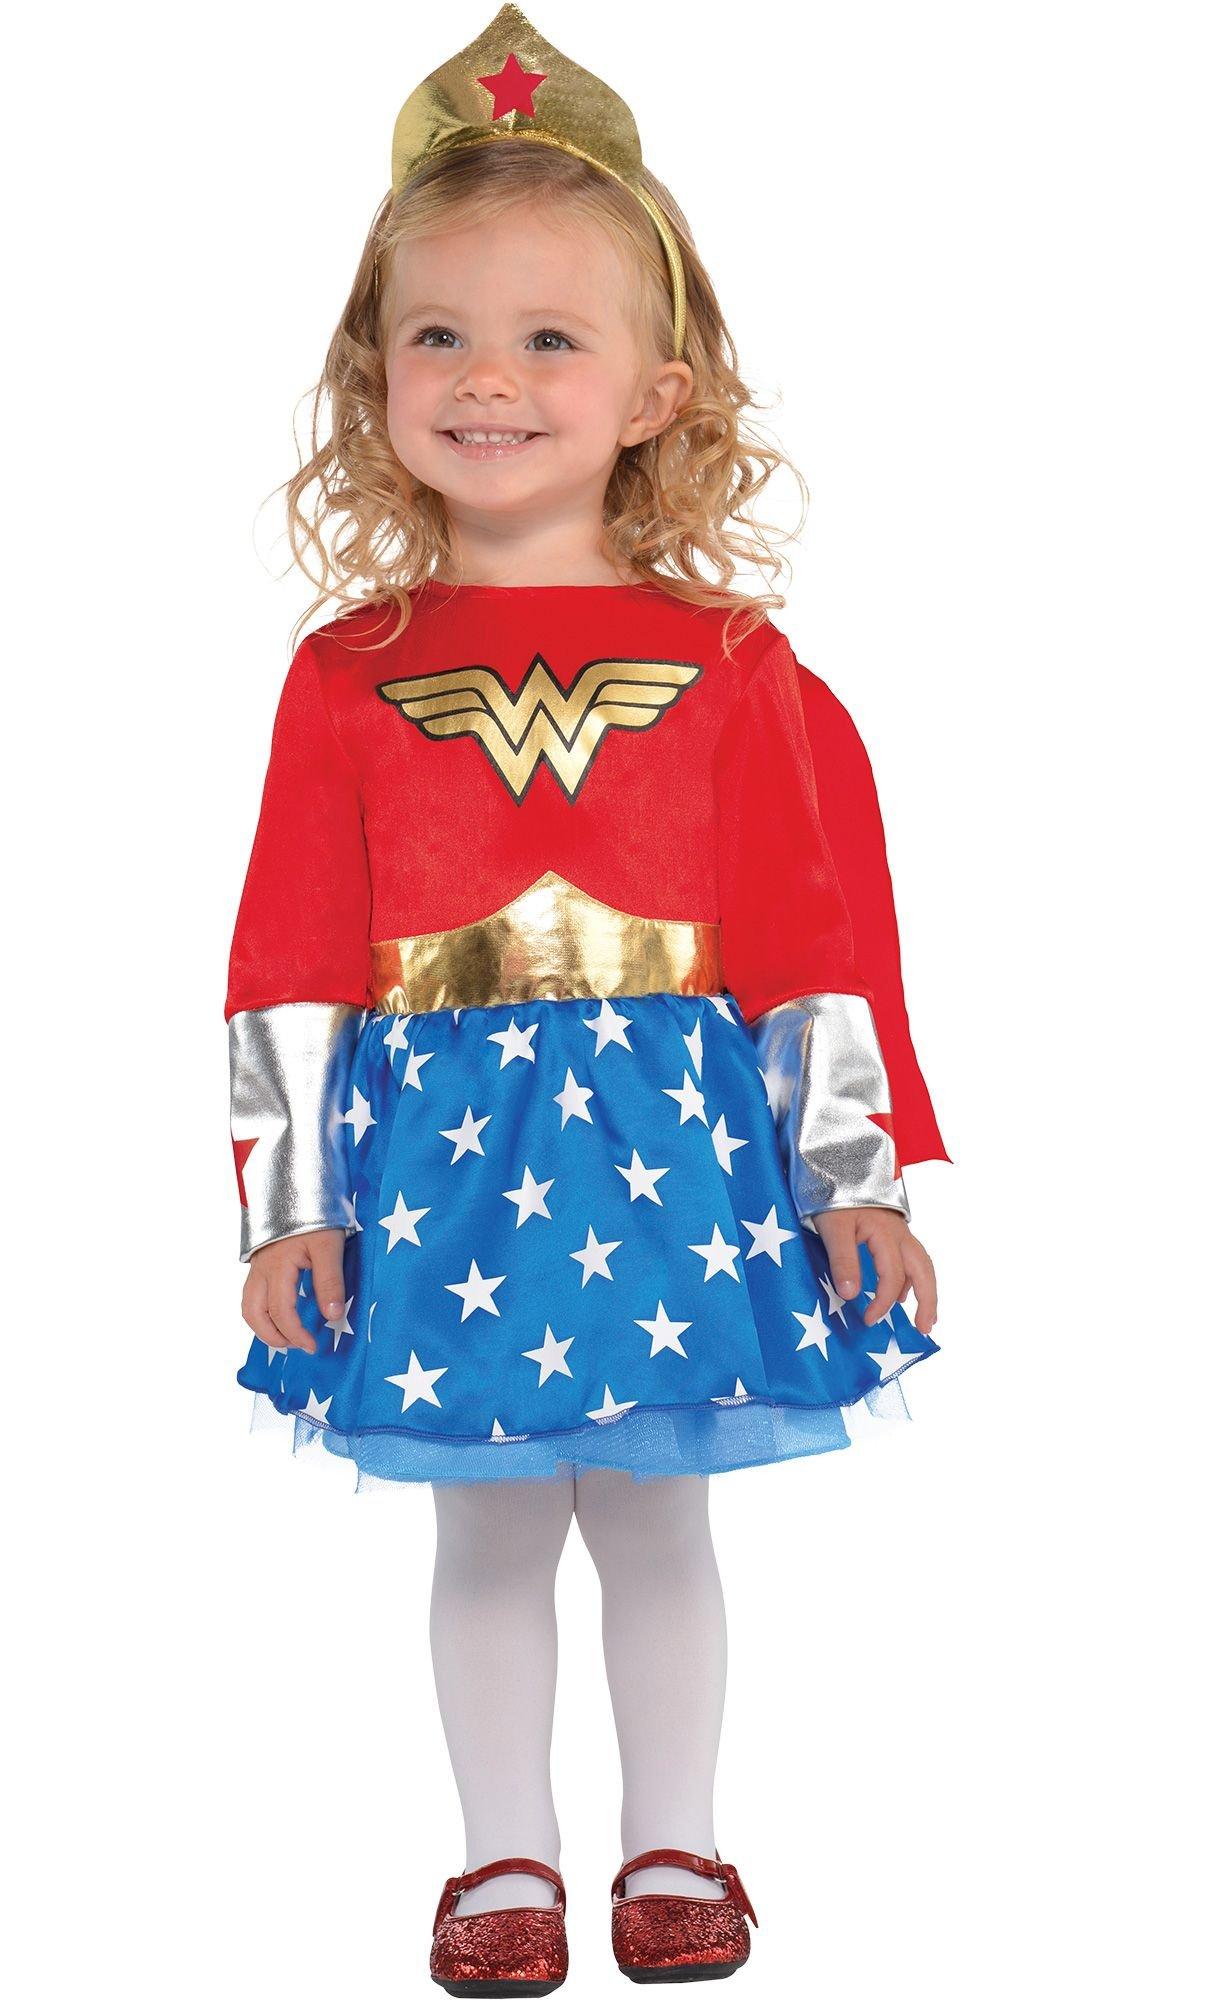 Baby Wonder Woman Costume | Party City